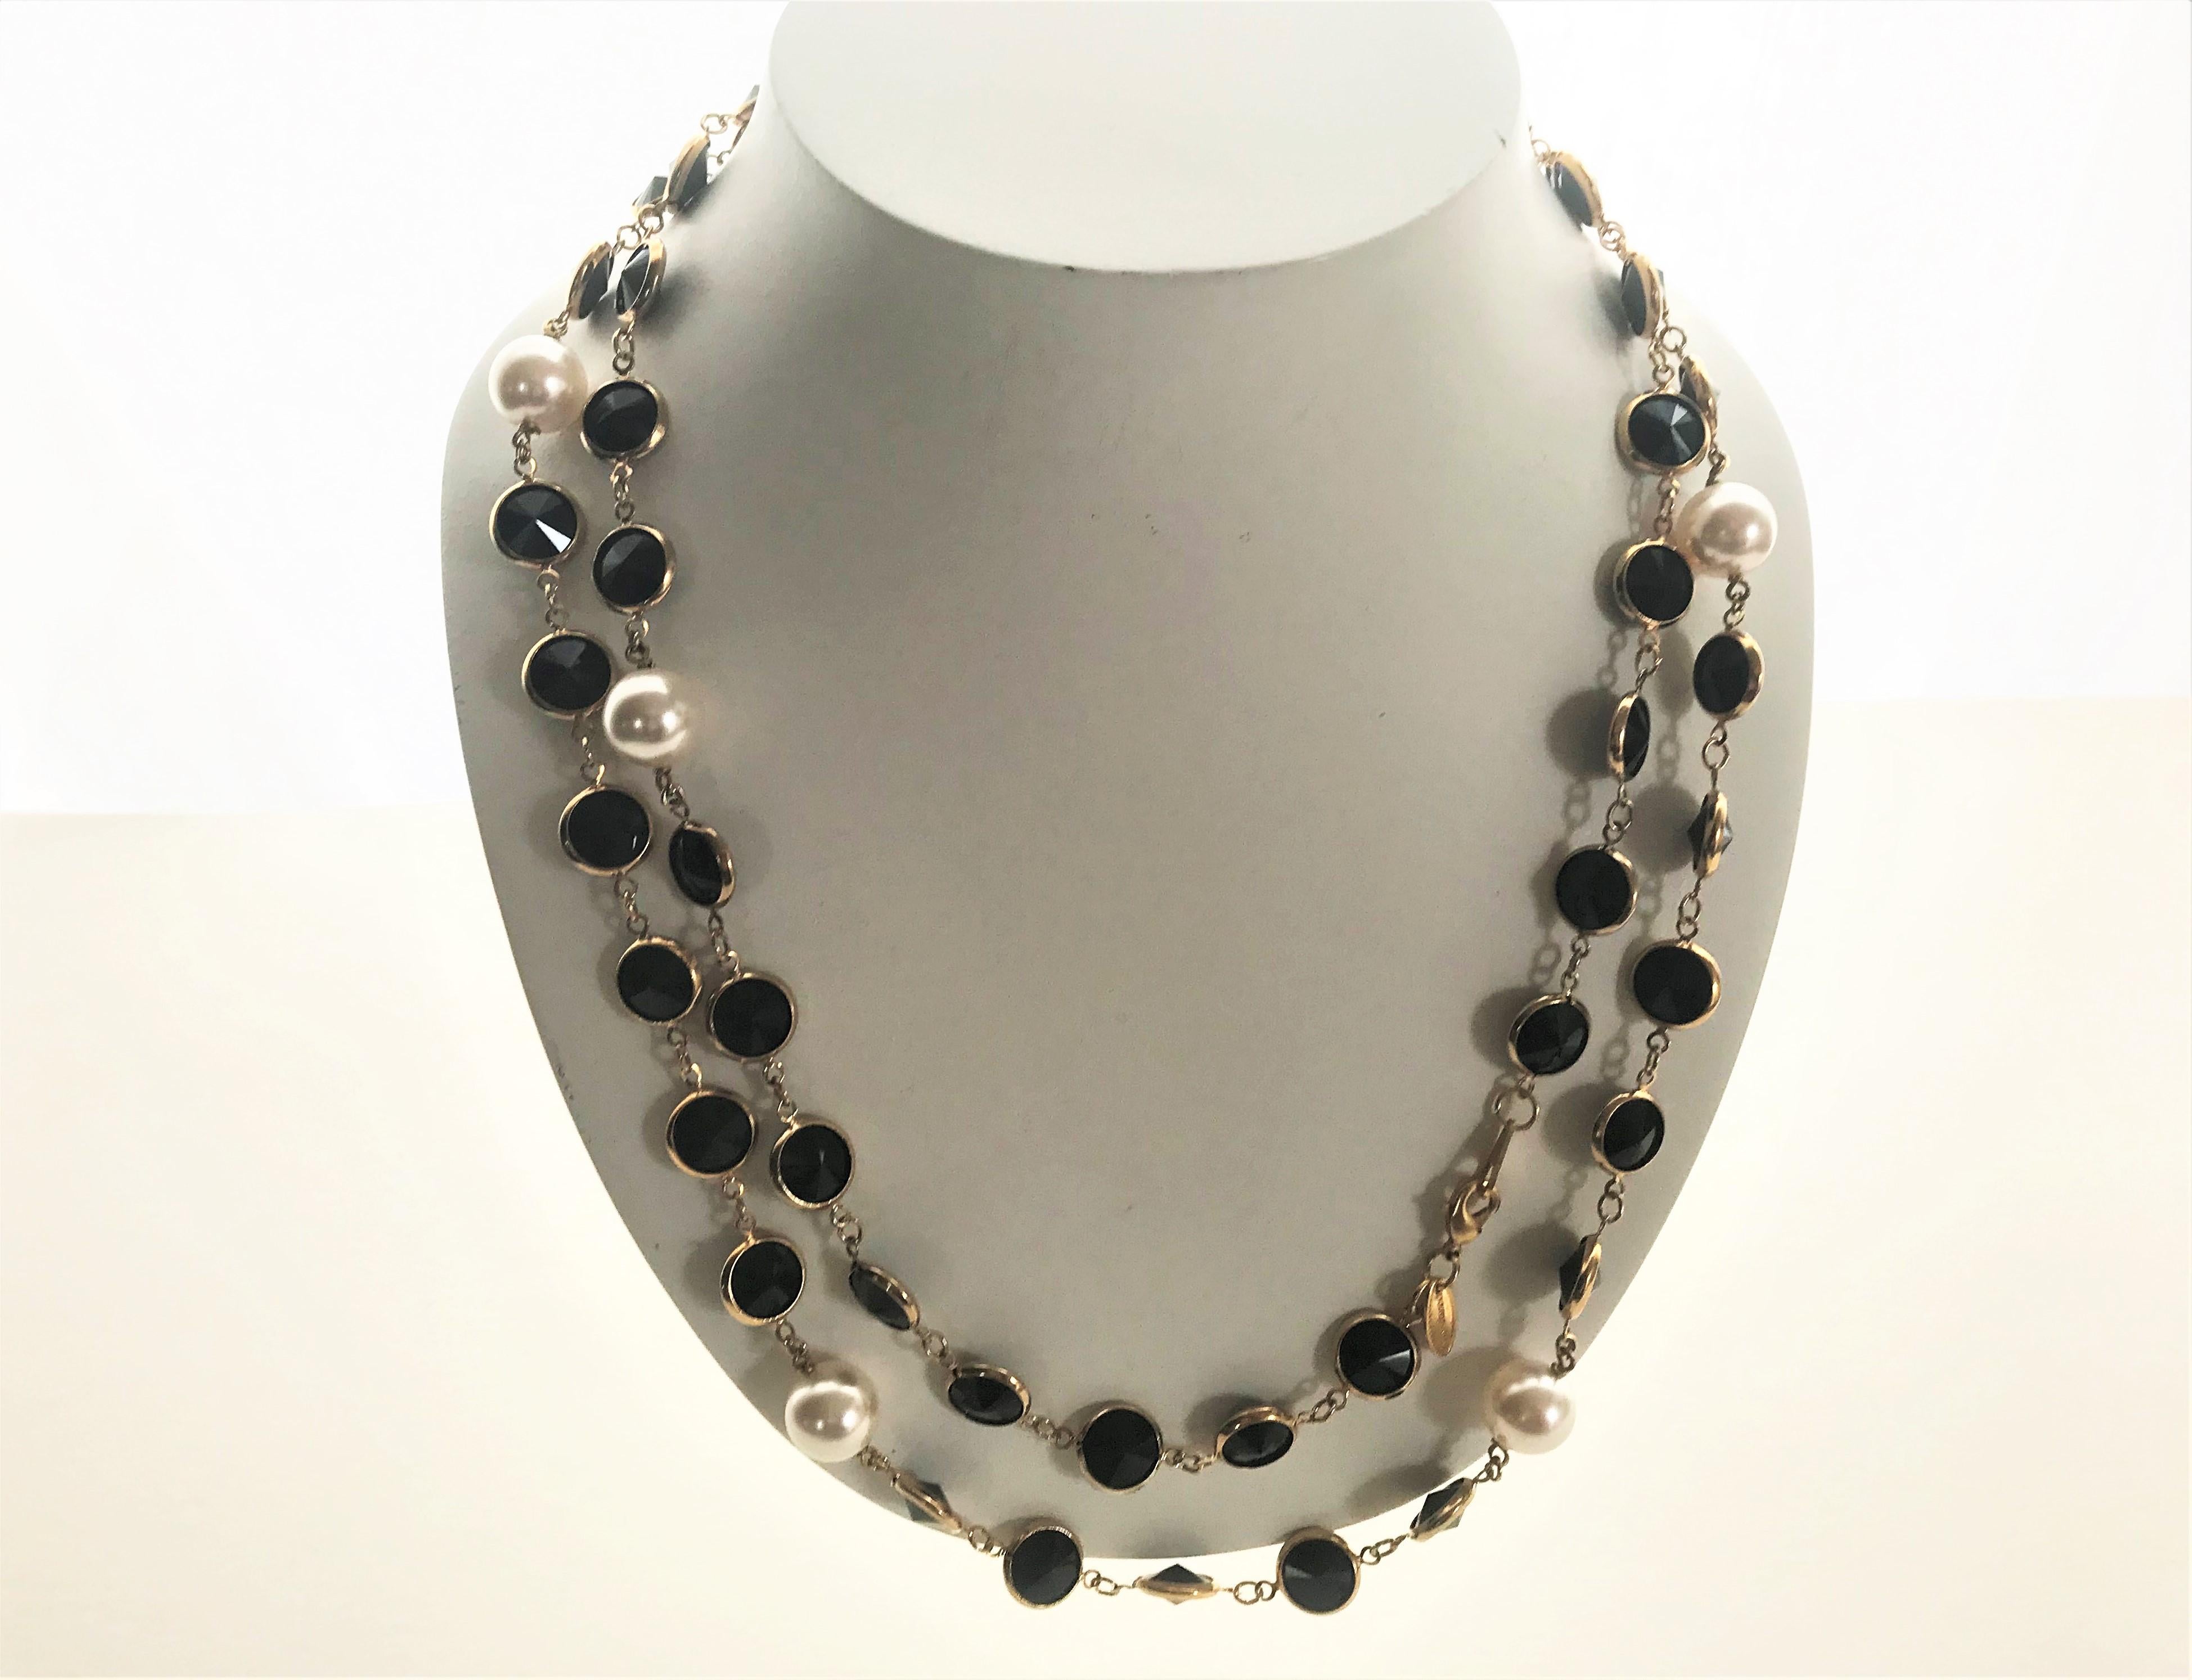 A black and white Necklace with polished crystal from Swarovski and some fake pears. The necklace is signed 'Pomp art' and has a closer. There is a new chain that has never worn and gold plated.
Measurement: Length 120/60 cm, faux pearls 1 cm, the